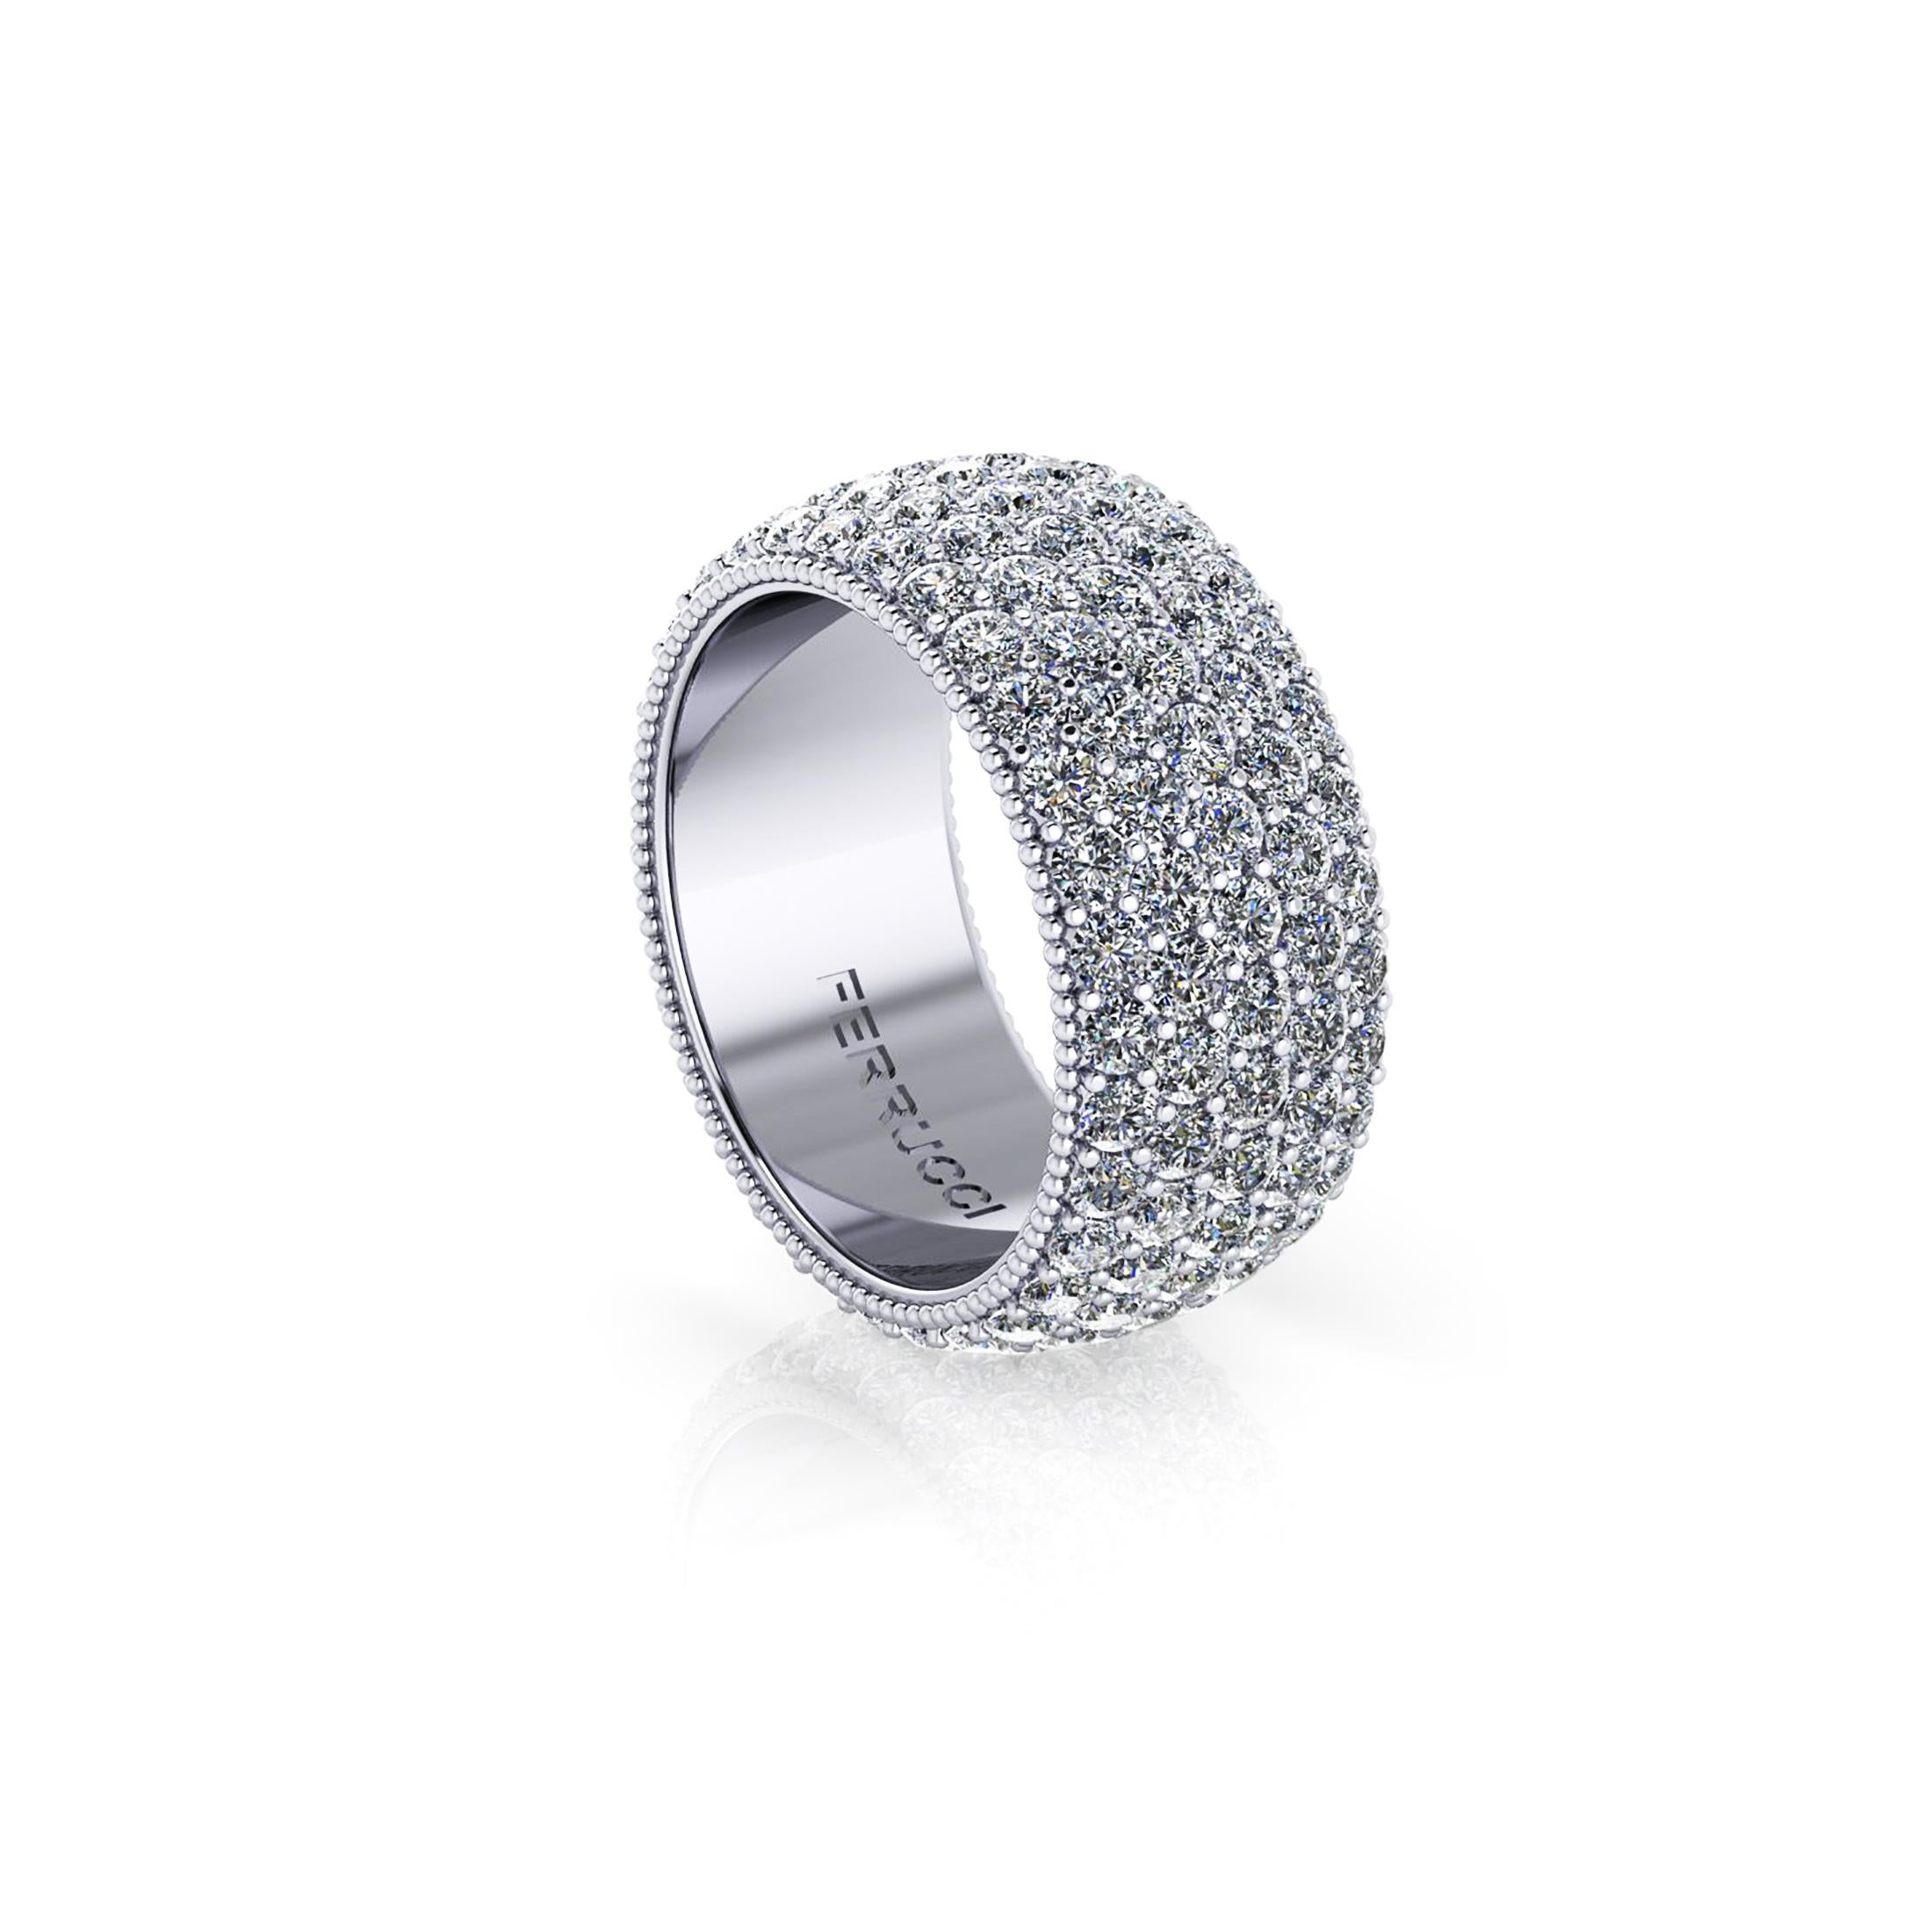 FERRUCCI Wide diamond pave' ring, with a slightly dome feeling, a wrap of sparkling white diamonds, G color clarity, VS/SI1 +++ for an approximate total carat weight of 4.70 carats, hand made in New York City by hand by  Italian master jeweler,